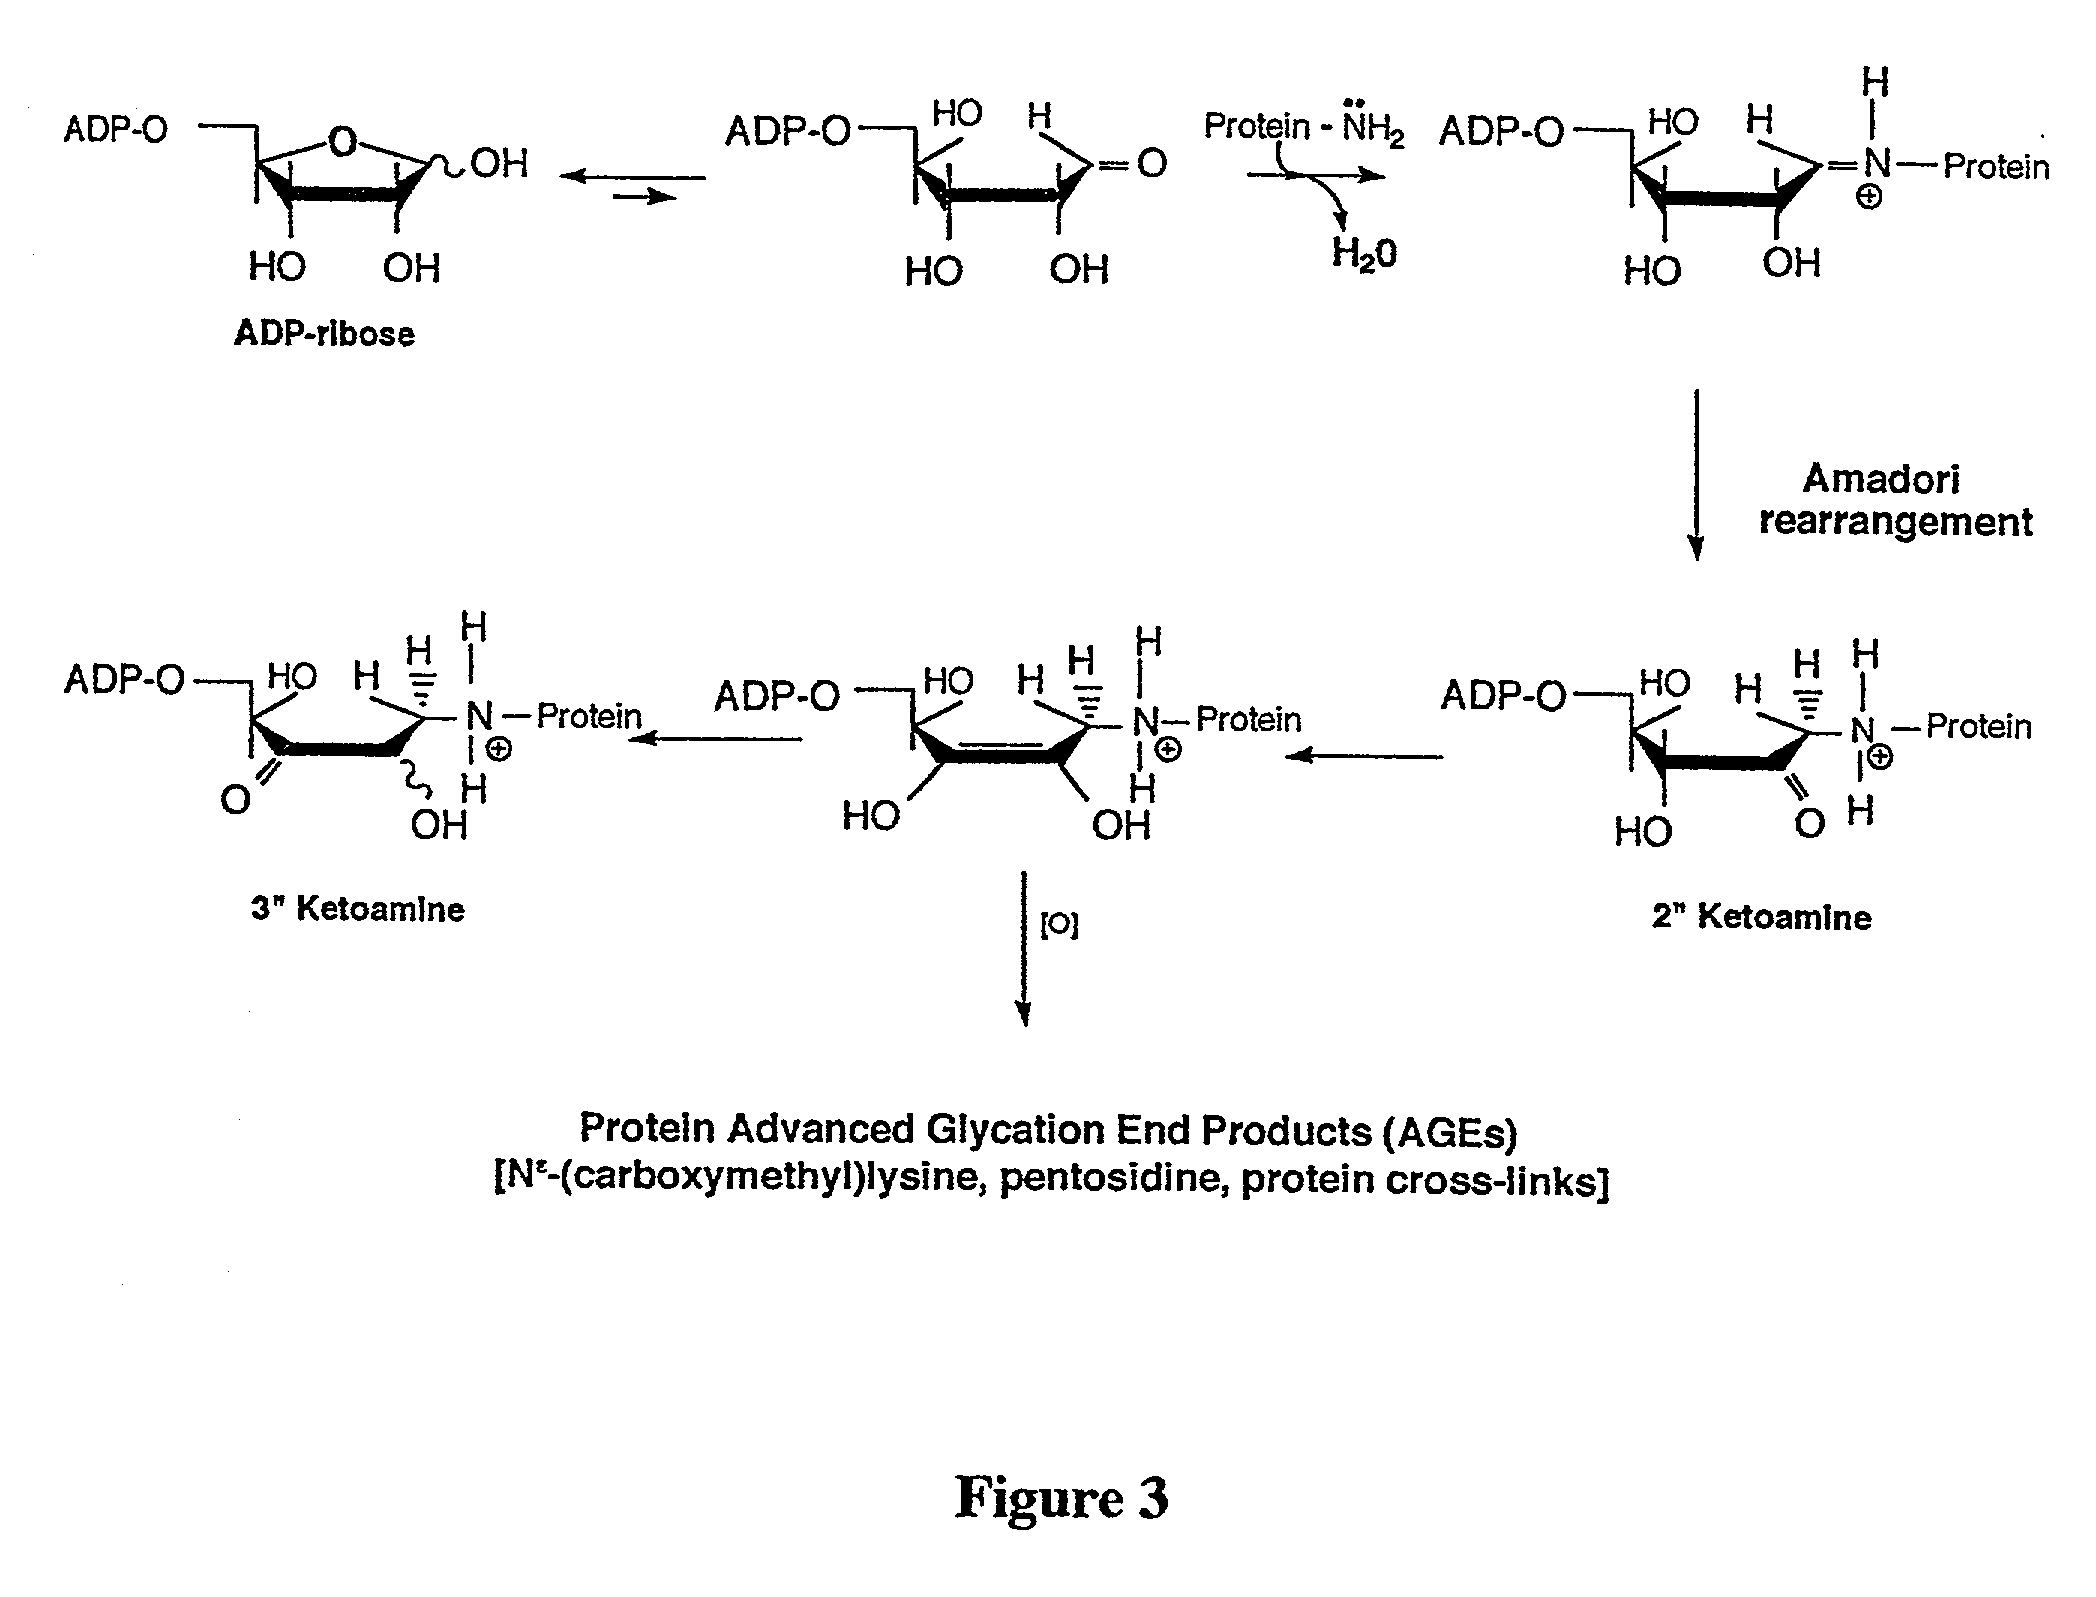 Method for identifying regulators of protein-advanced glycation end product (protein-AGE) formation